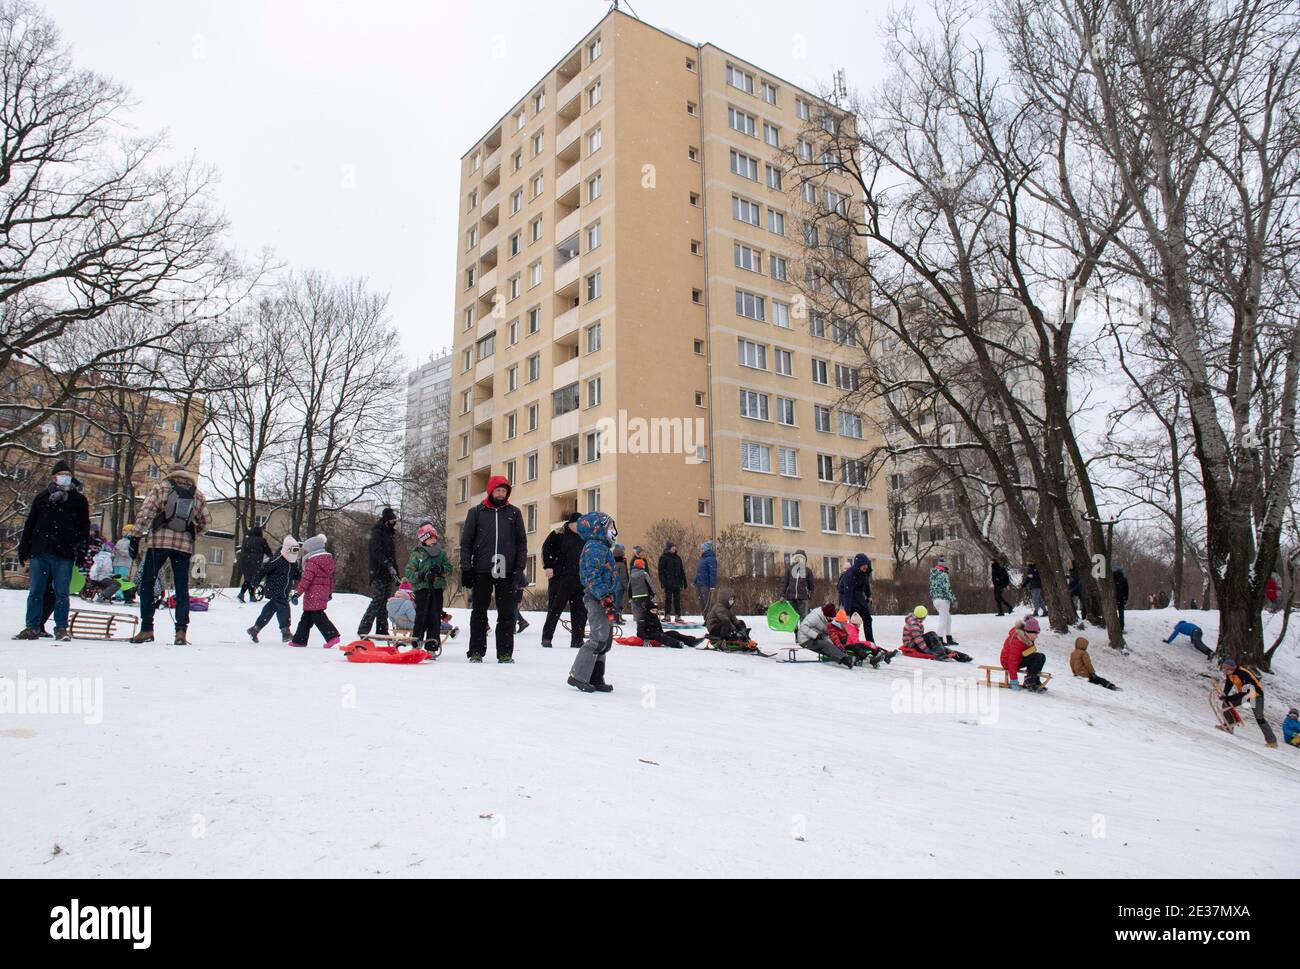 Warsaw, Warsaw, Poland. 17th Jan, 2021. Kids wit for their turn to sled down the slope on January 17, 2021 in Warsaw, Poland. Parents with their kids gathered in Morskie Oko park in Warsaw to sled despite the ongoing coronavirus pandemic. According to the ministry of health, in the last 24 hours Poland has 6055 positive cases with 55,200 tests. 37 people died of Covid-19. Credit: Aleksander Kalka/ZUMA Wire/Alamy Live News Stock Photo